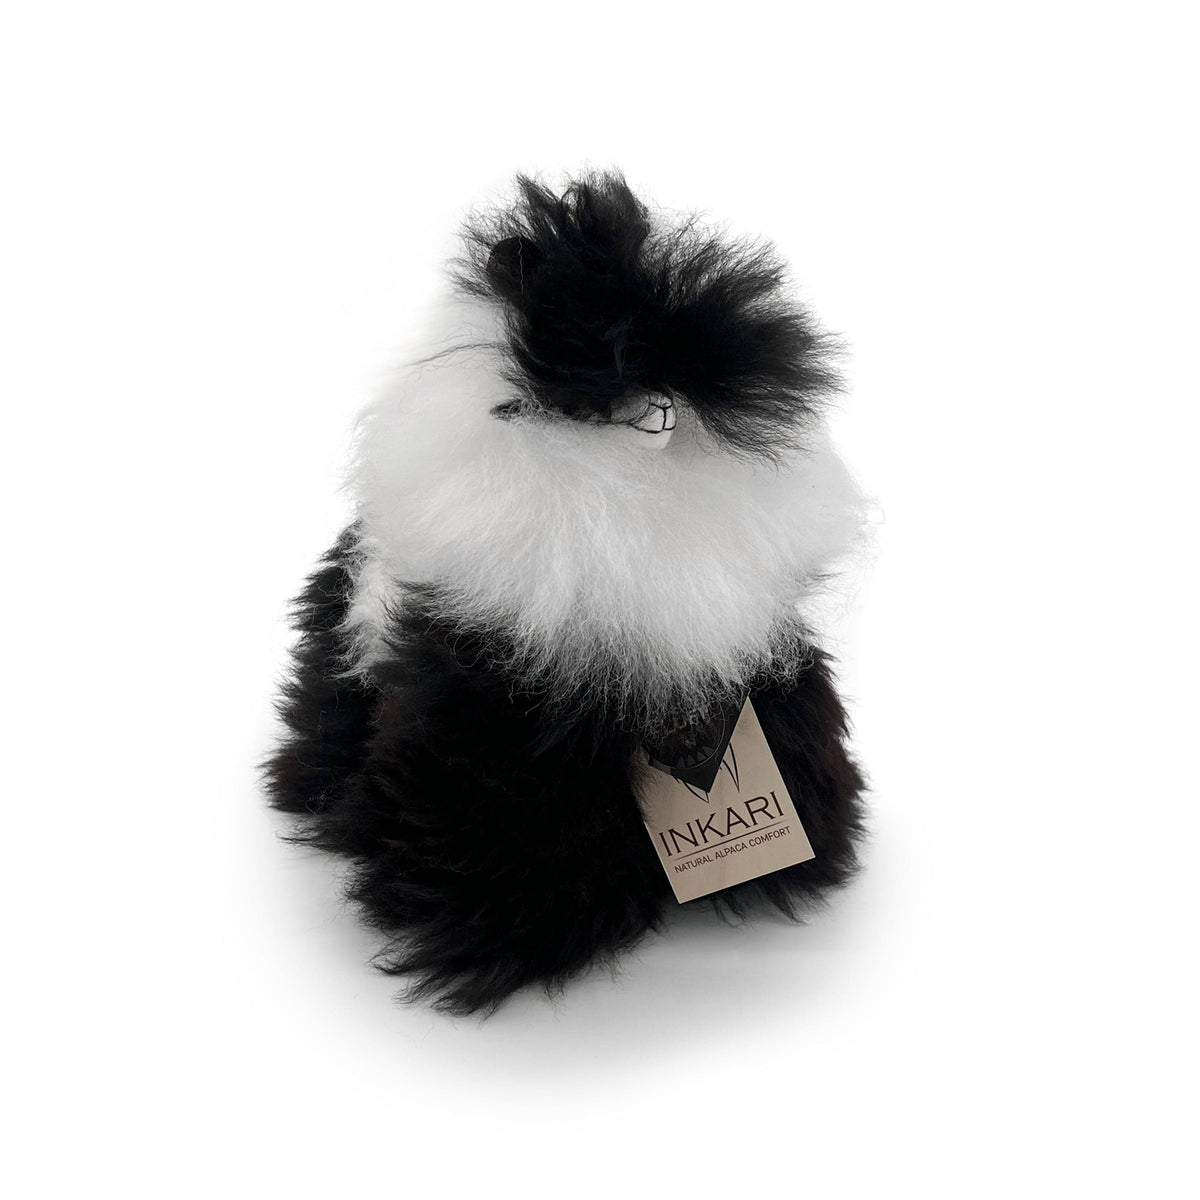 Monsterfluff Orca - Small Alpaca Toy (23cm) - Limited Edition